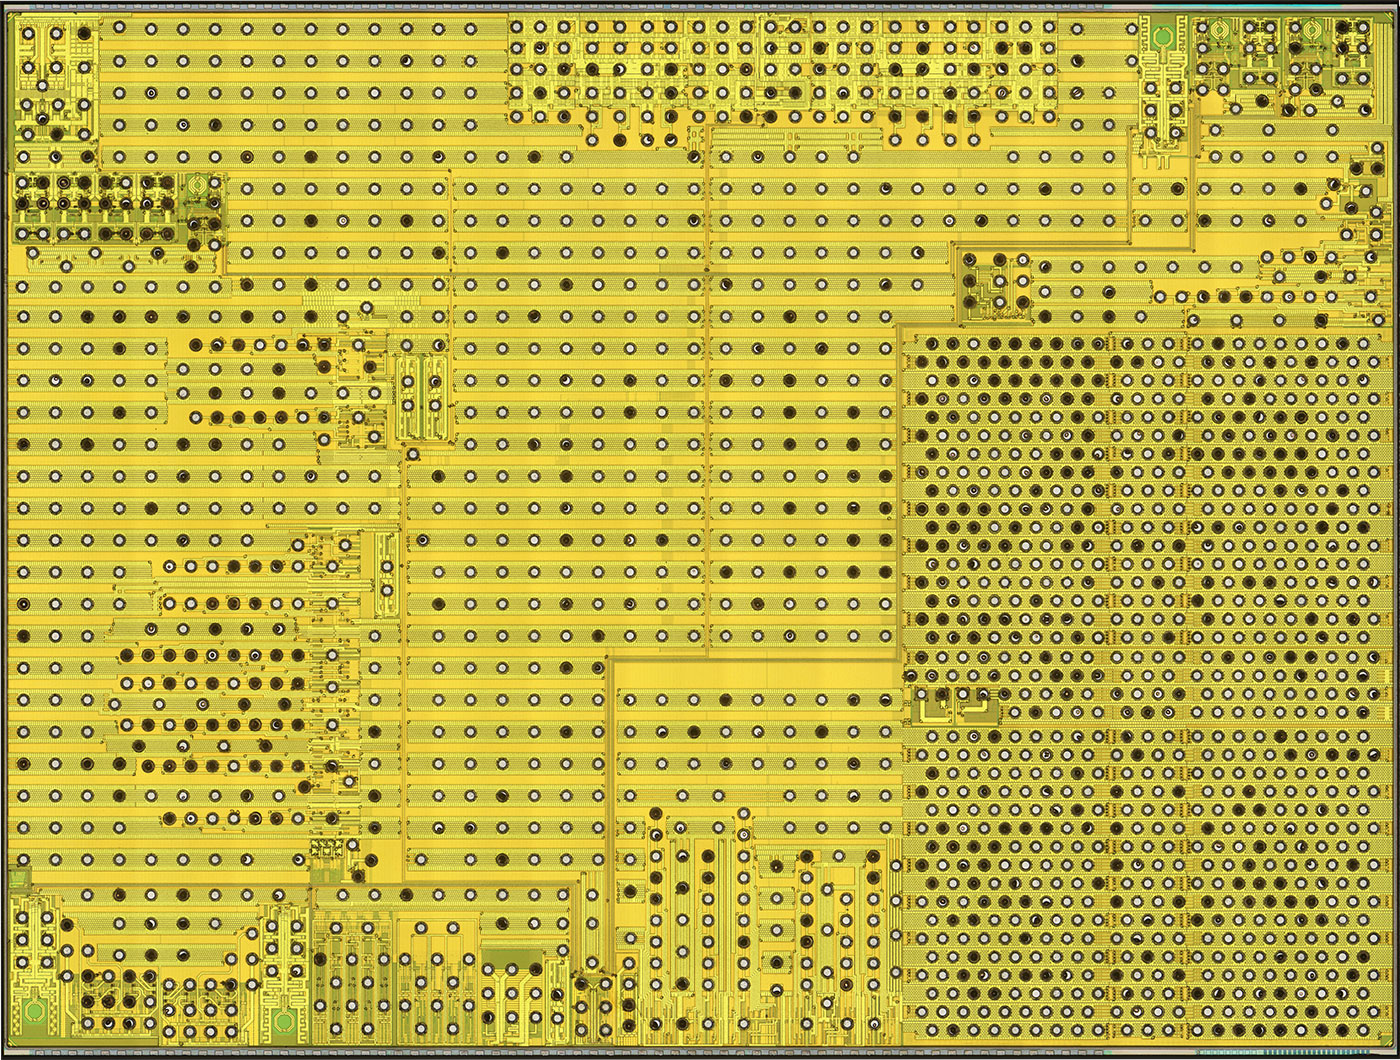 BCM2712 die shots - top layer polyimide